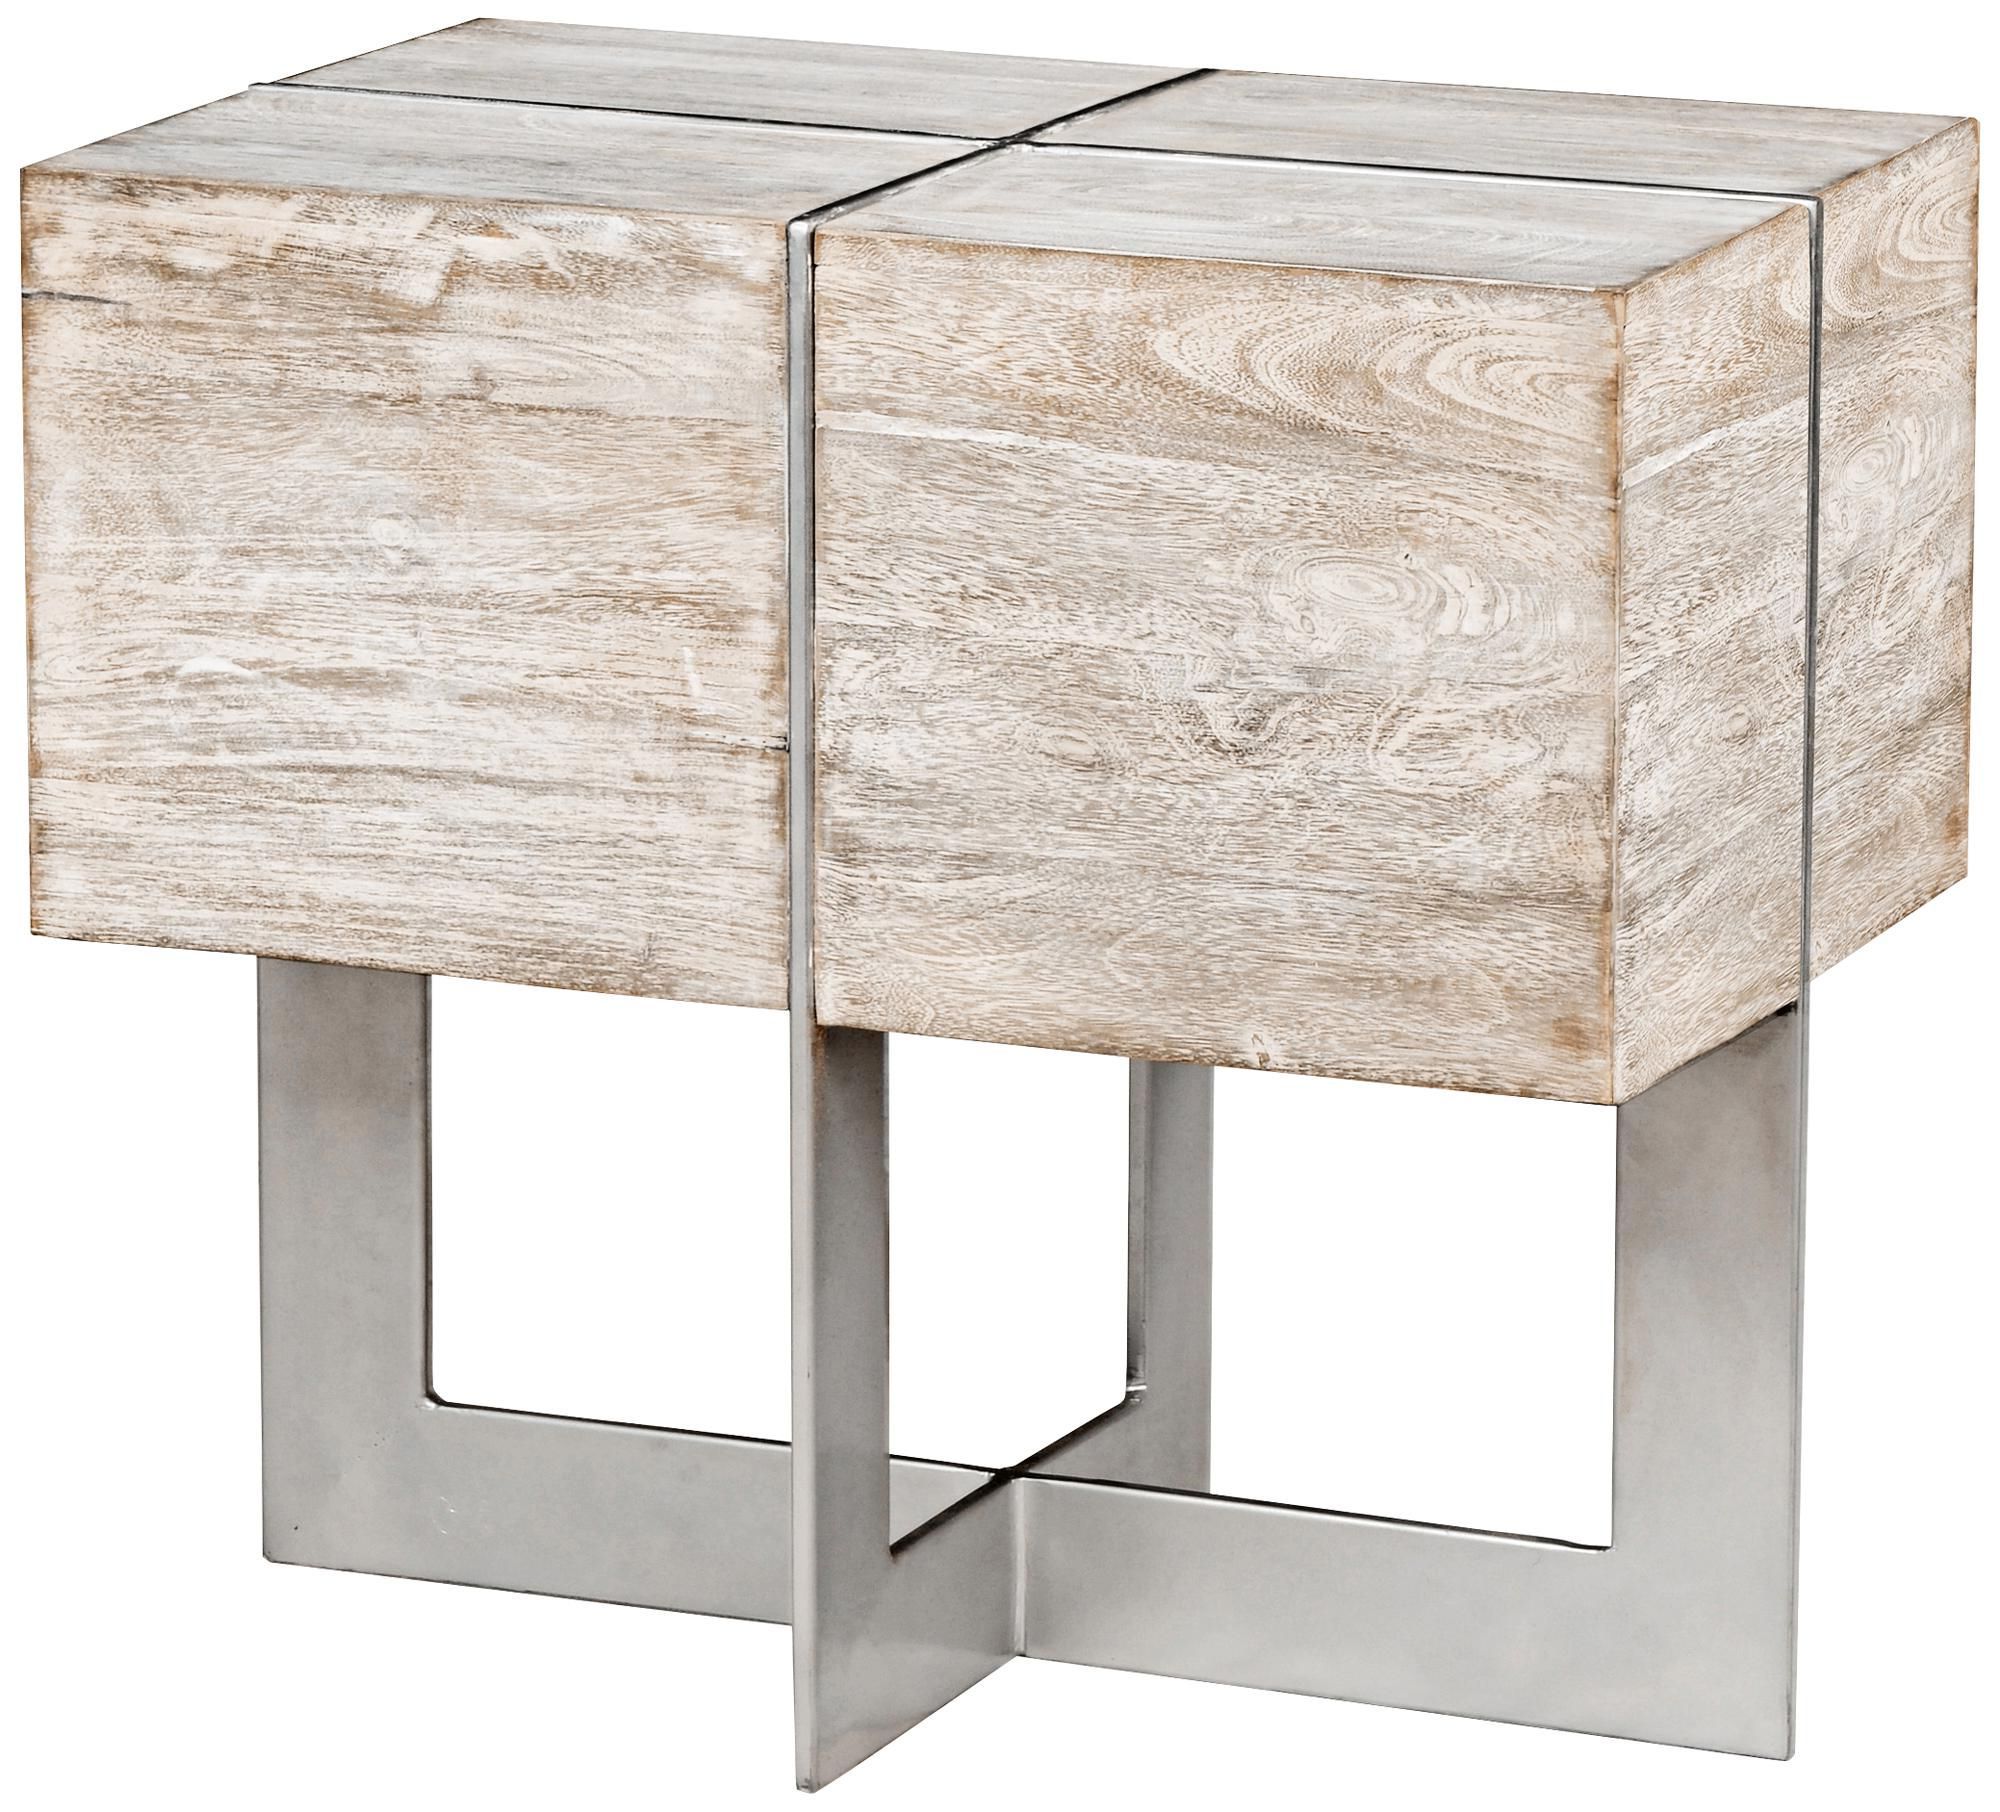 Desmond White Wash Solid Mango Wood Block End Table (View 17 of 20)